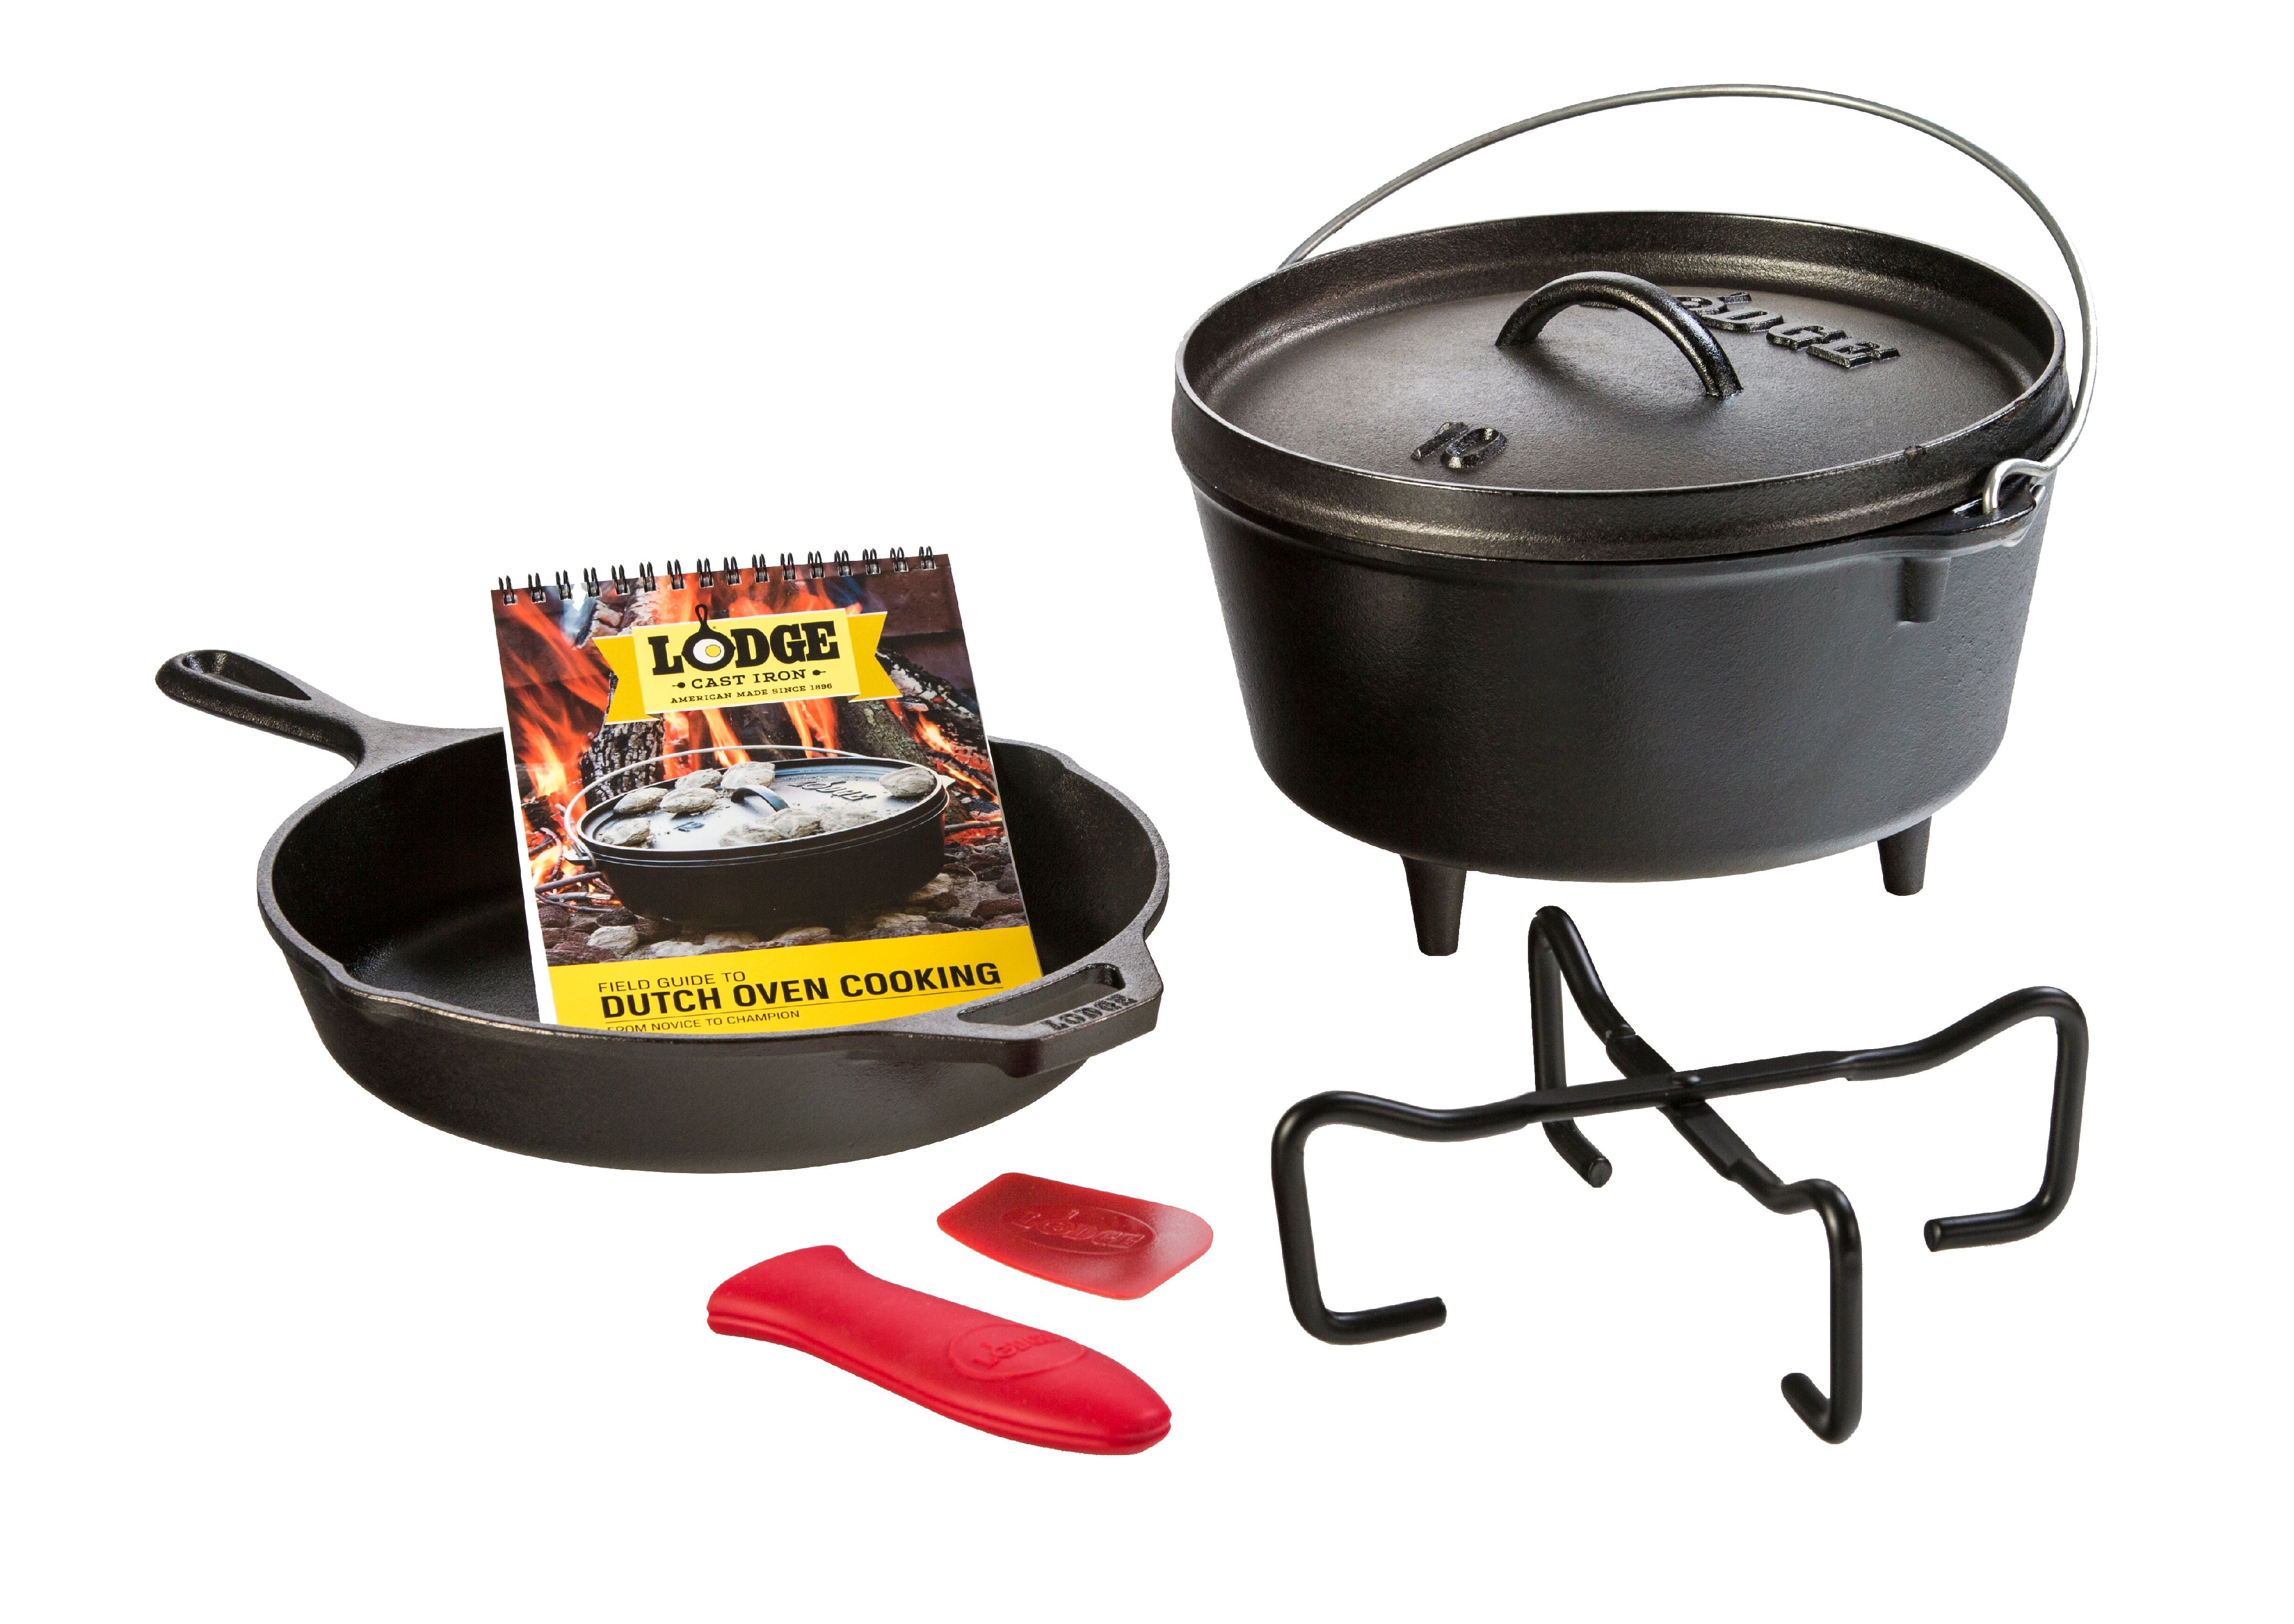 Lodge's Cast Iron Dutch Ovens, Skillets, and More Pieces Are Up to